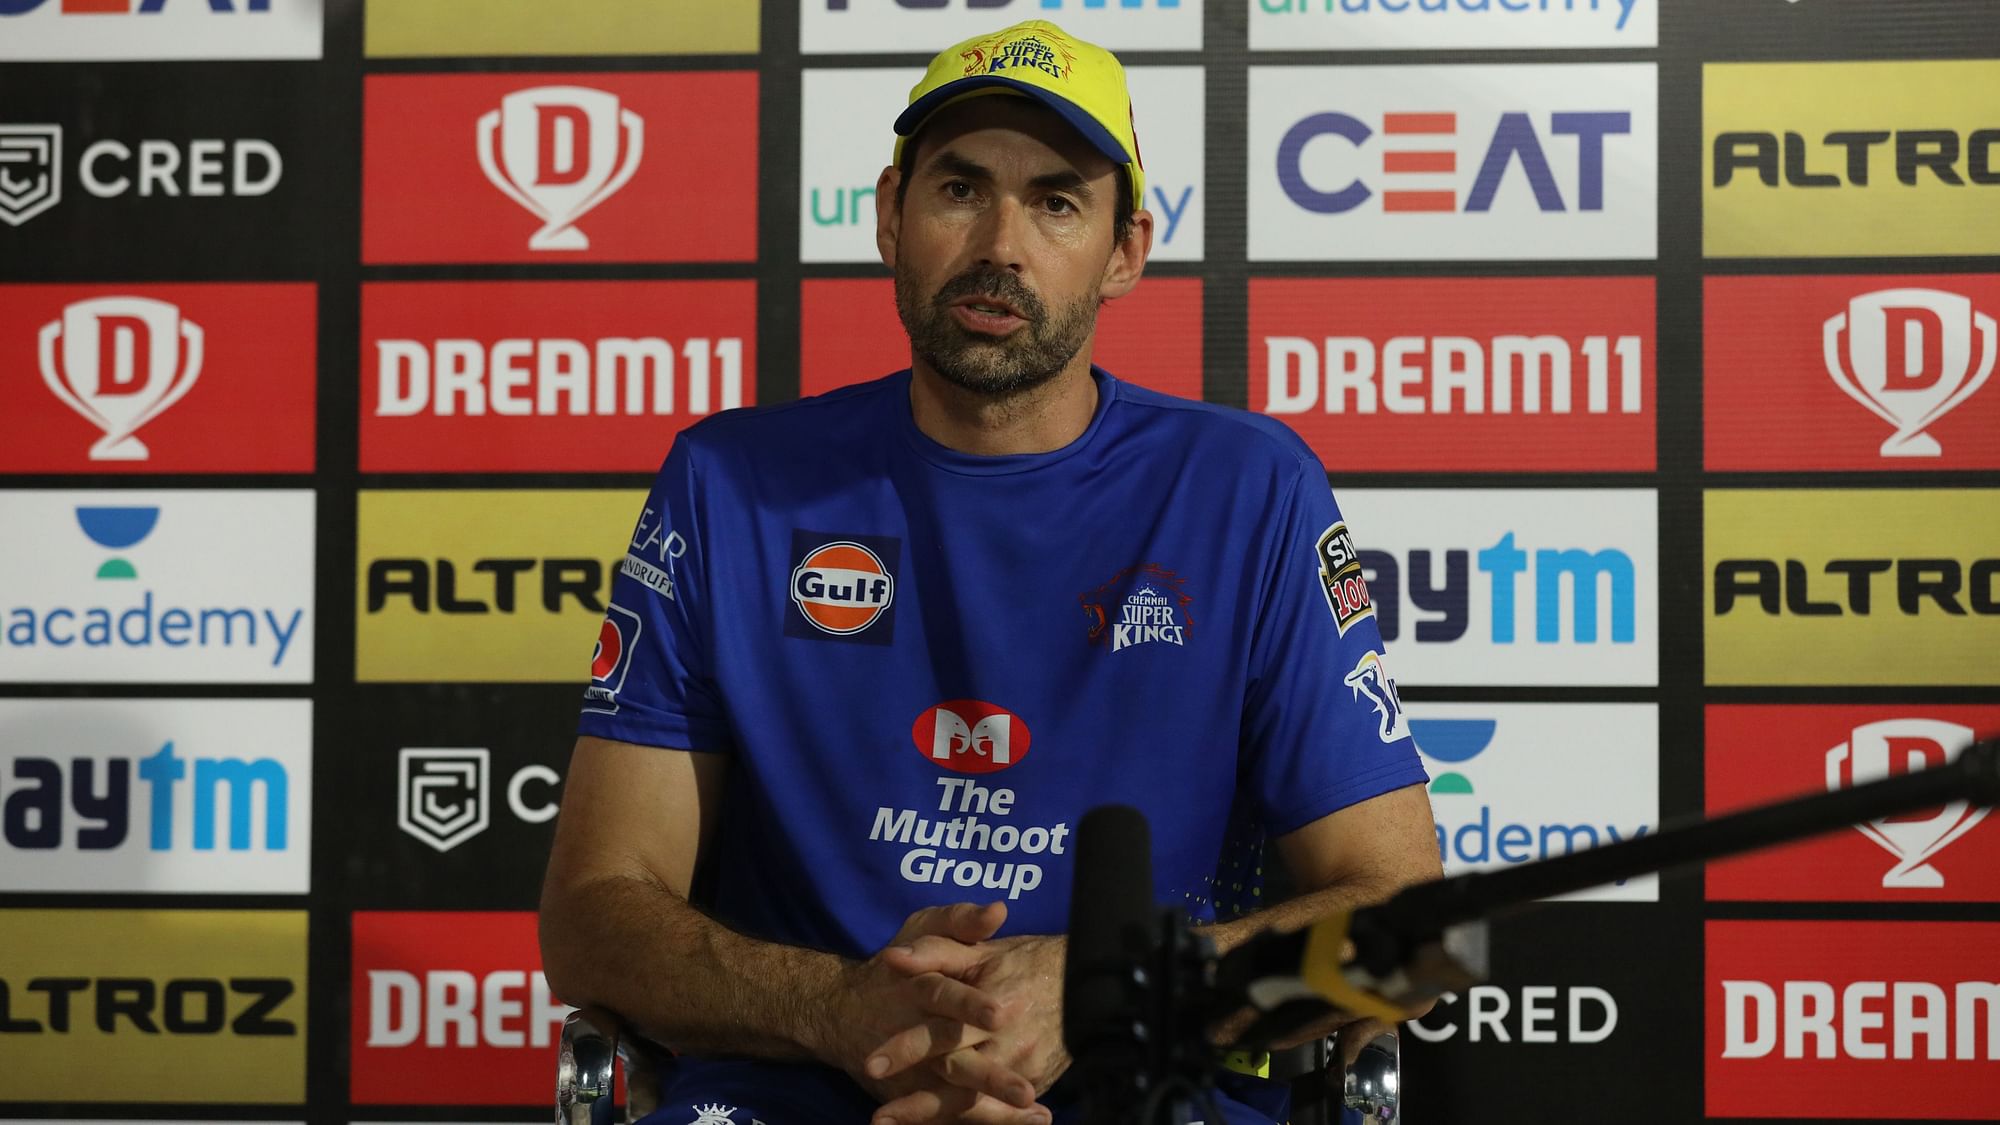 Chennai Super Kings coach Stephen Fleming admitted that they were slow to adjust and spinners bowled too full on that pitch